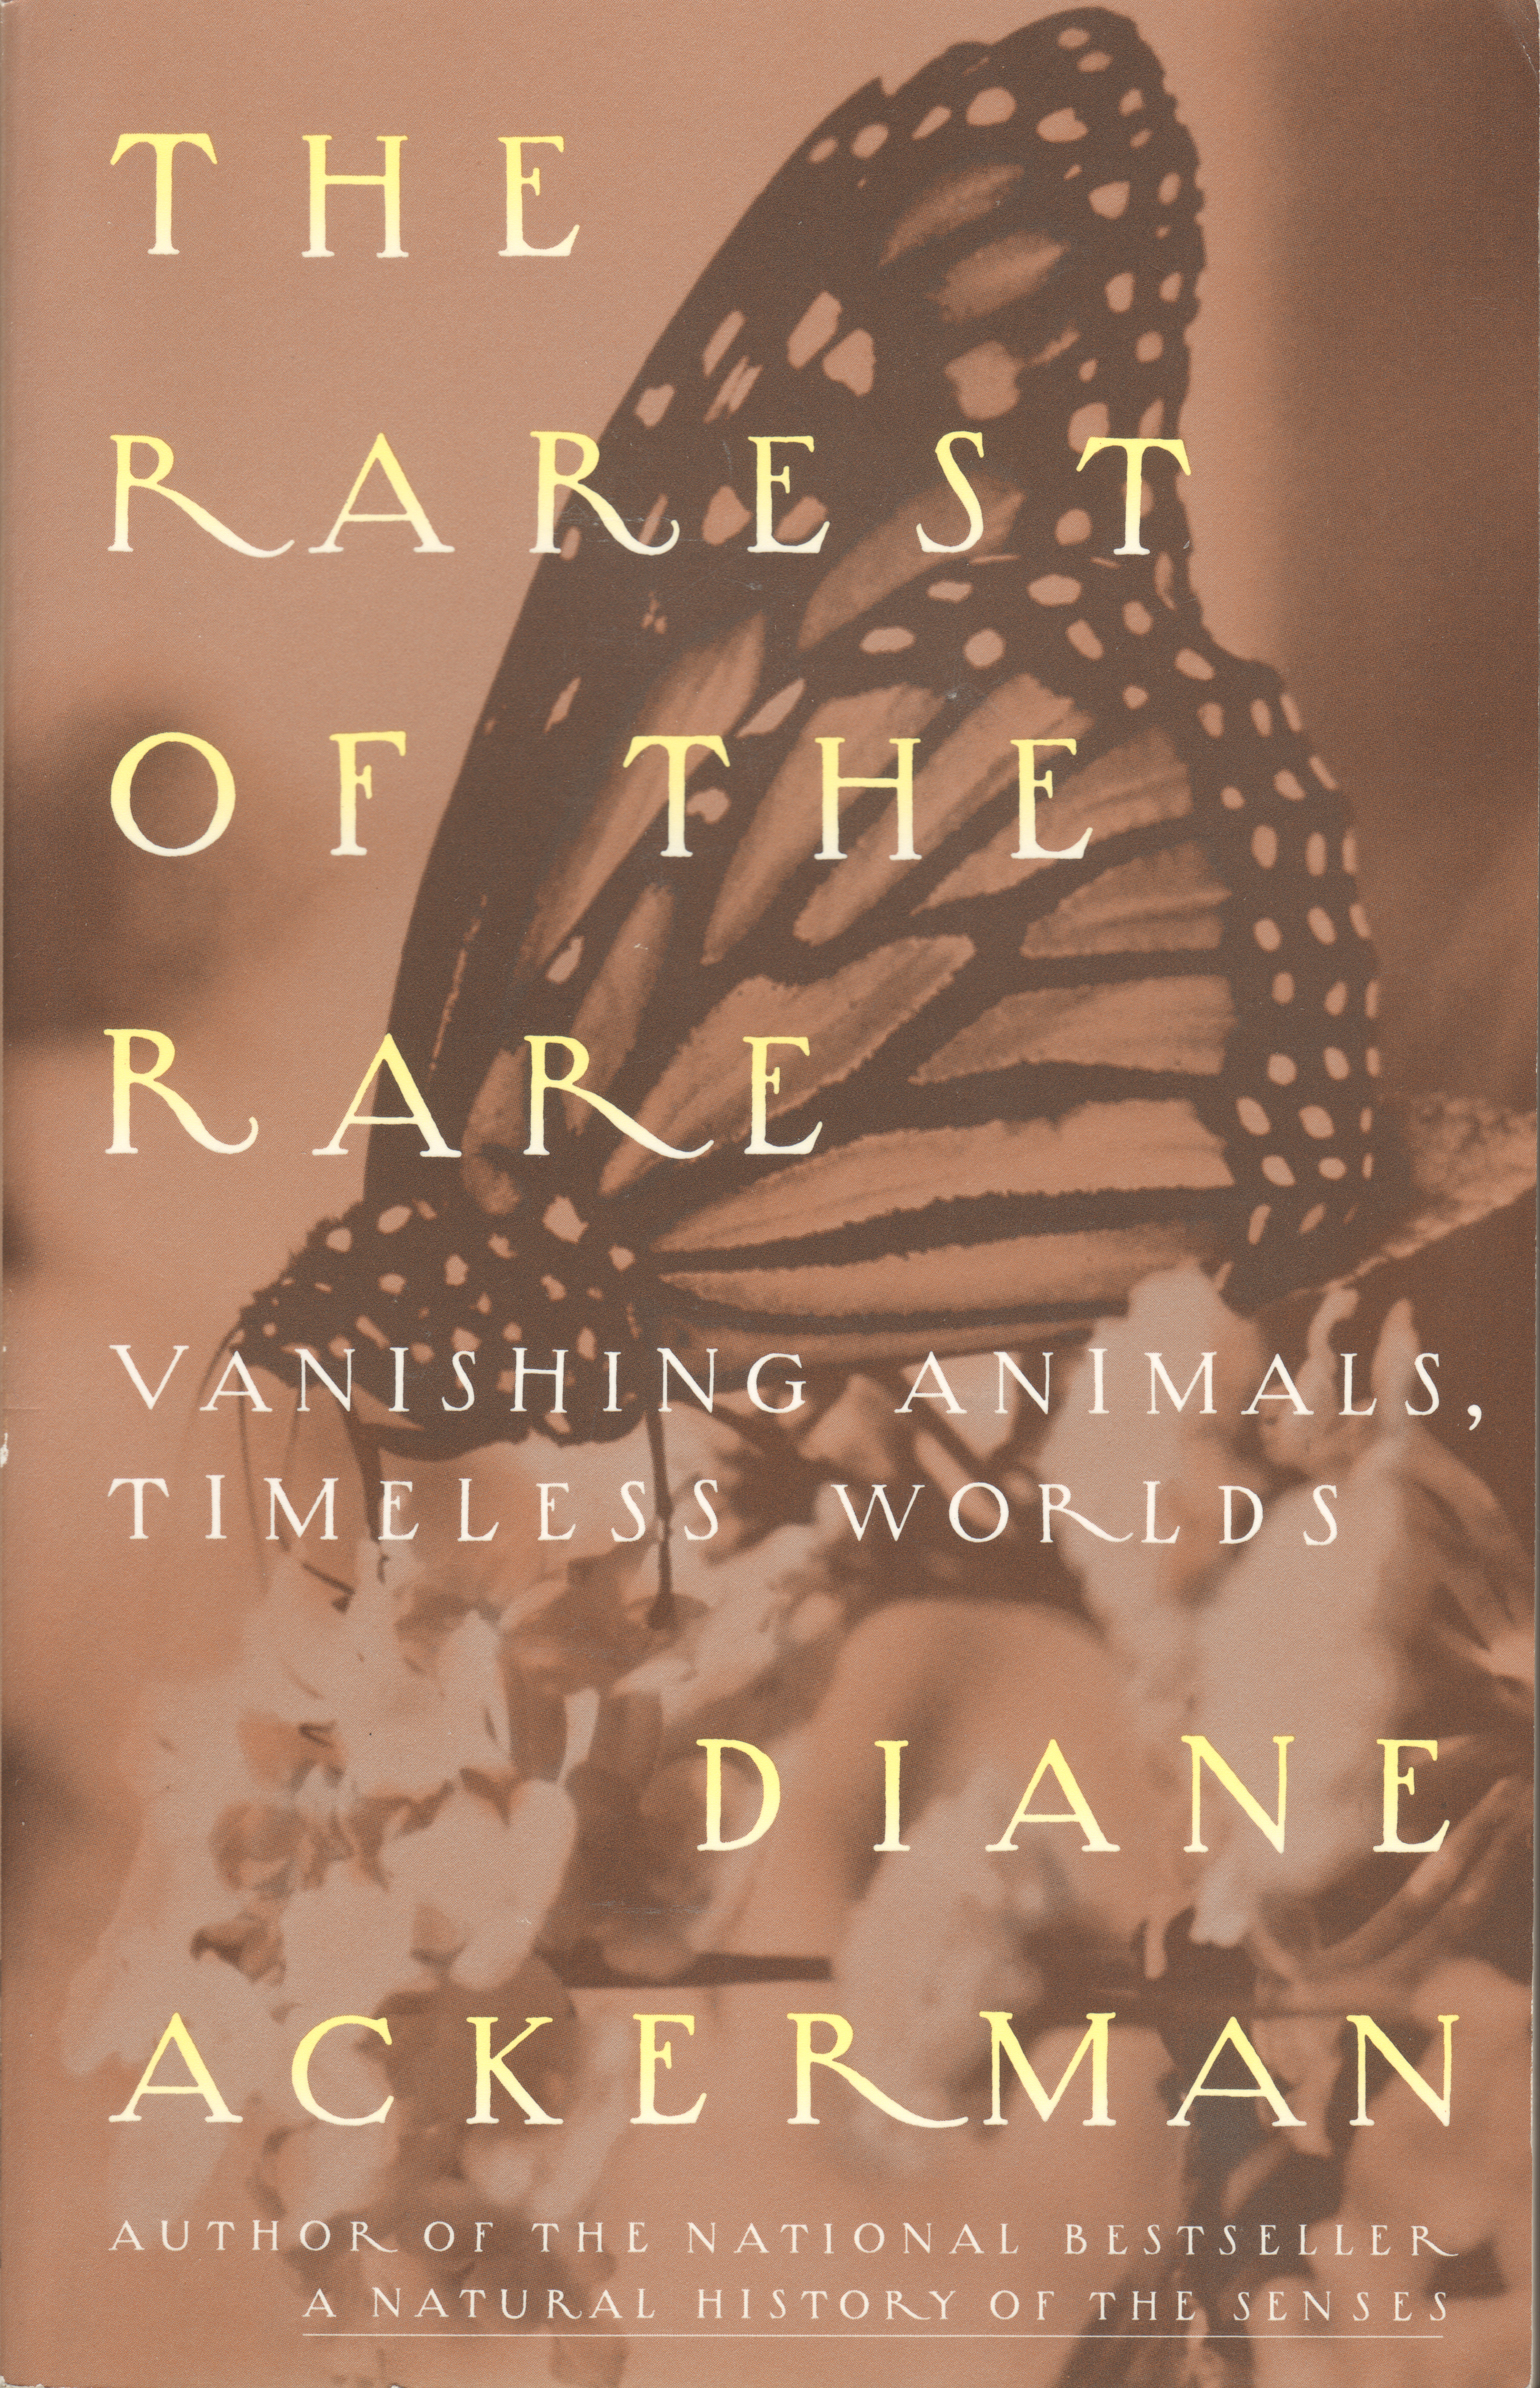 The Rarest of the Rare by Diane Ackerman